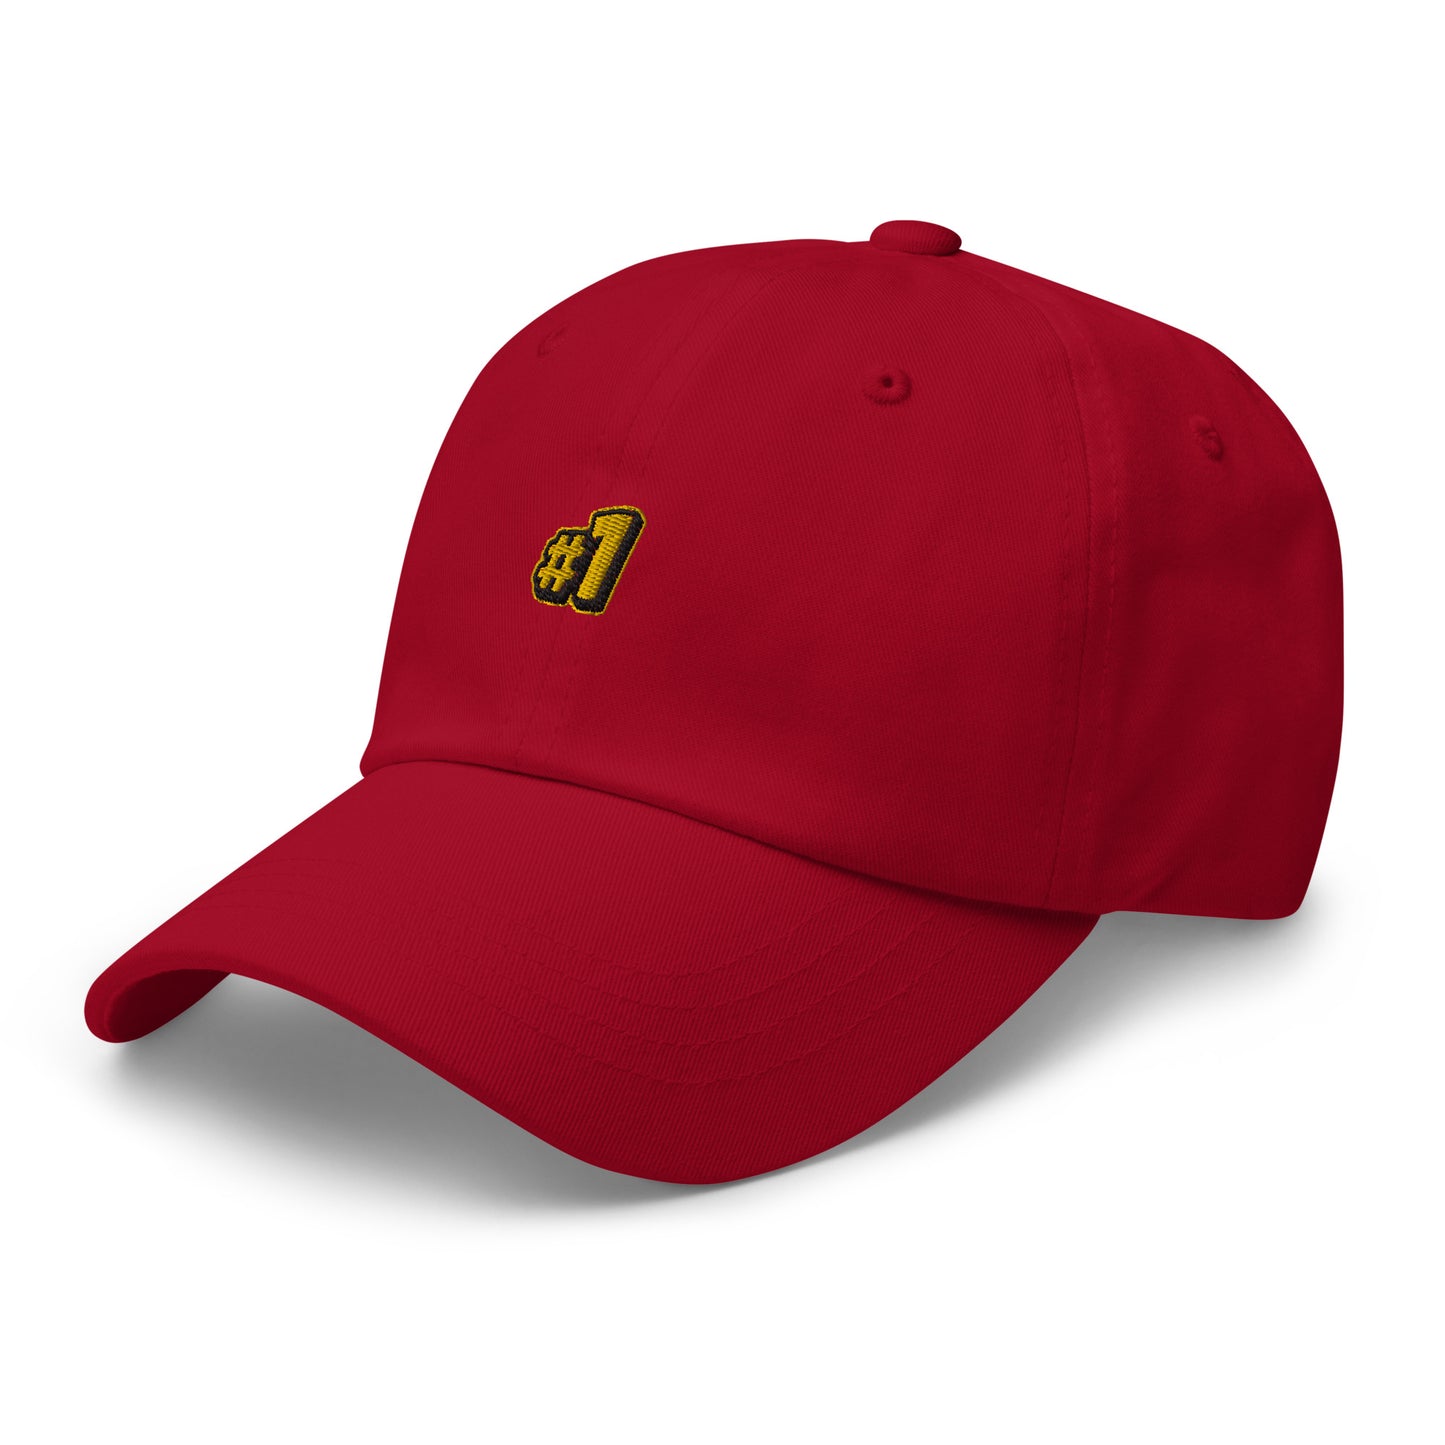 Dad Cap with 1nd Place Symbol